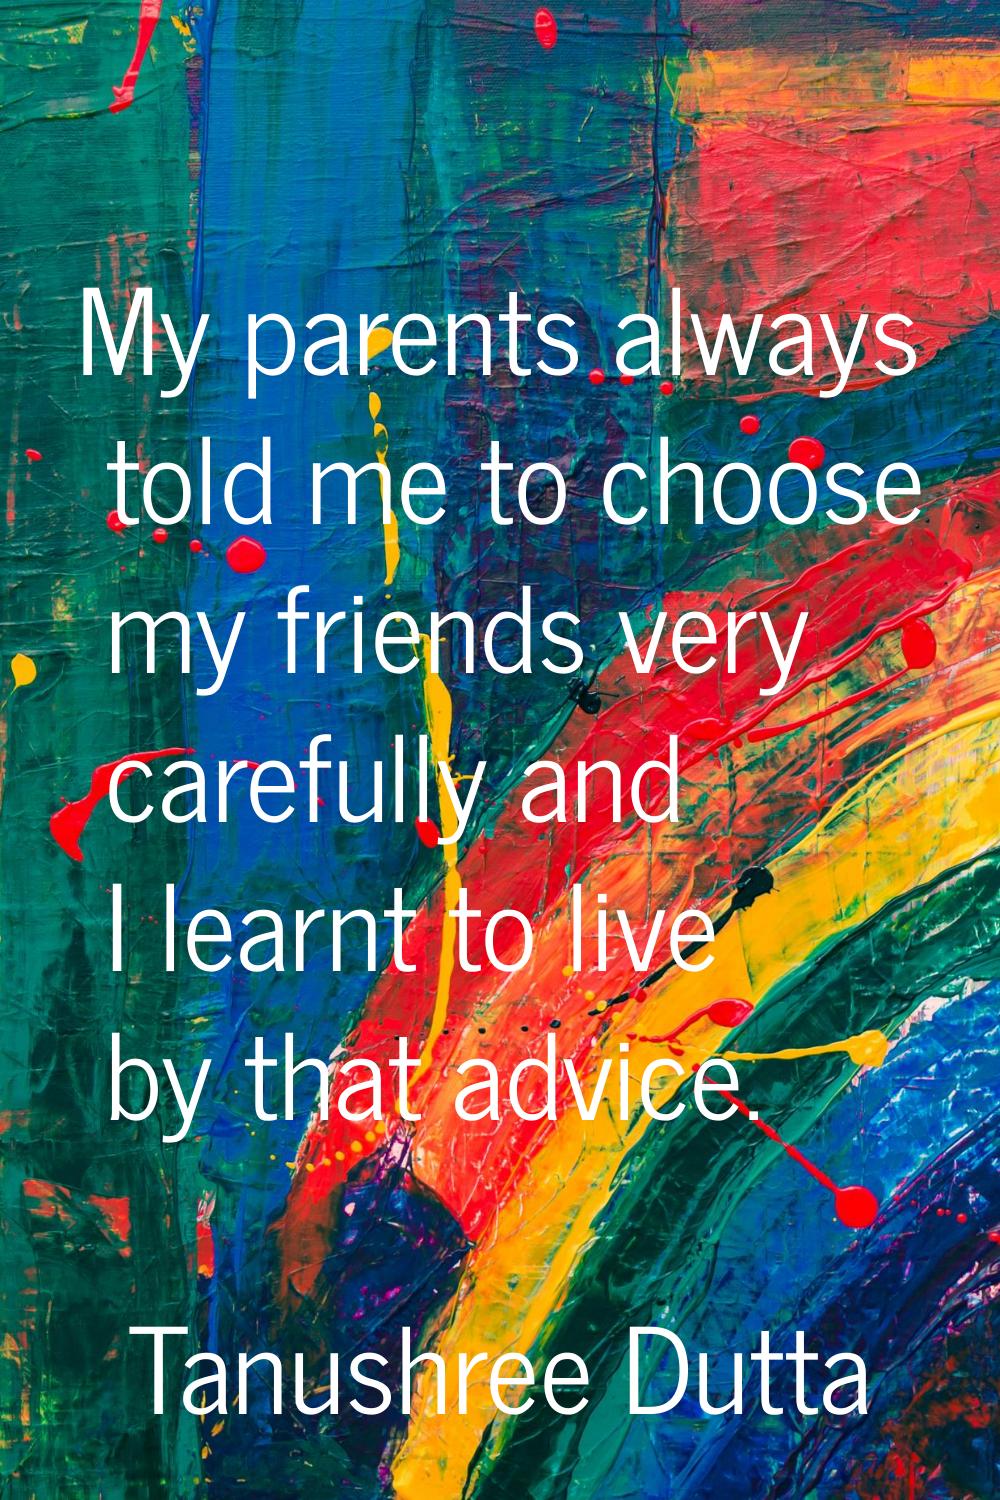 My parents always told me to choose my friends very carefully and I learnt to live by that advice.